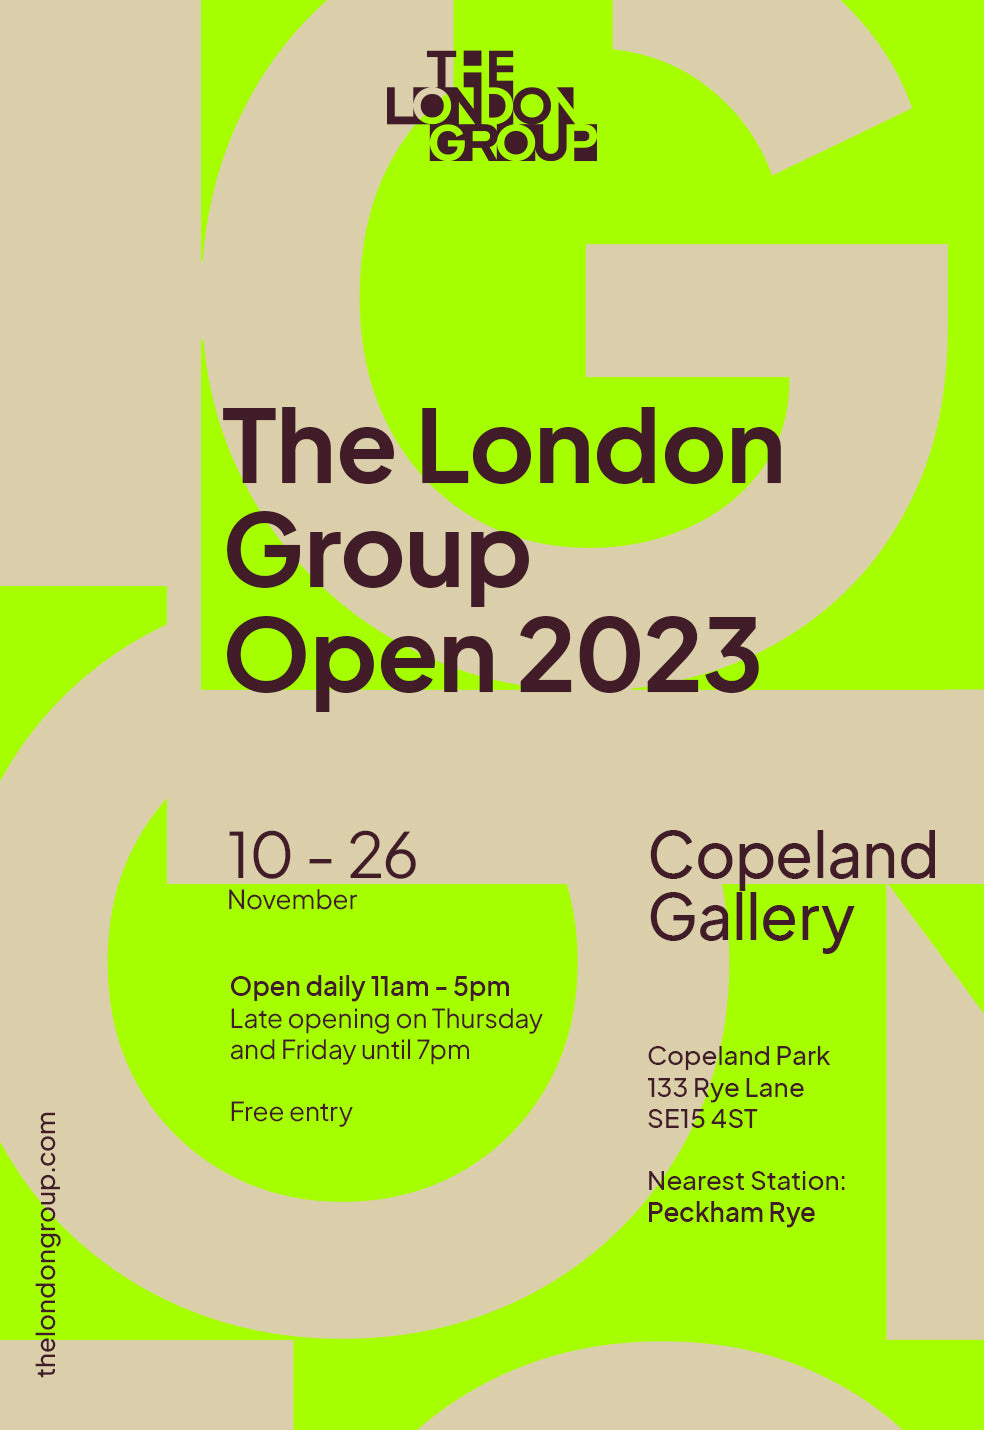 Showing in the London Group Open